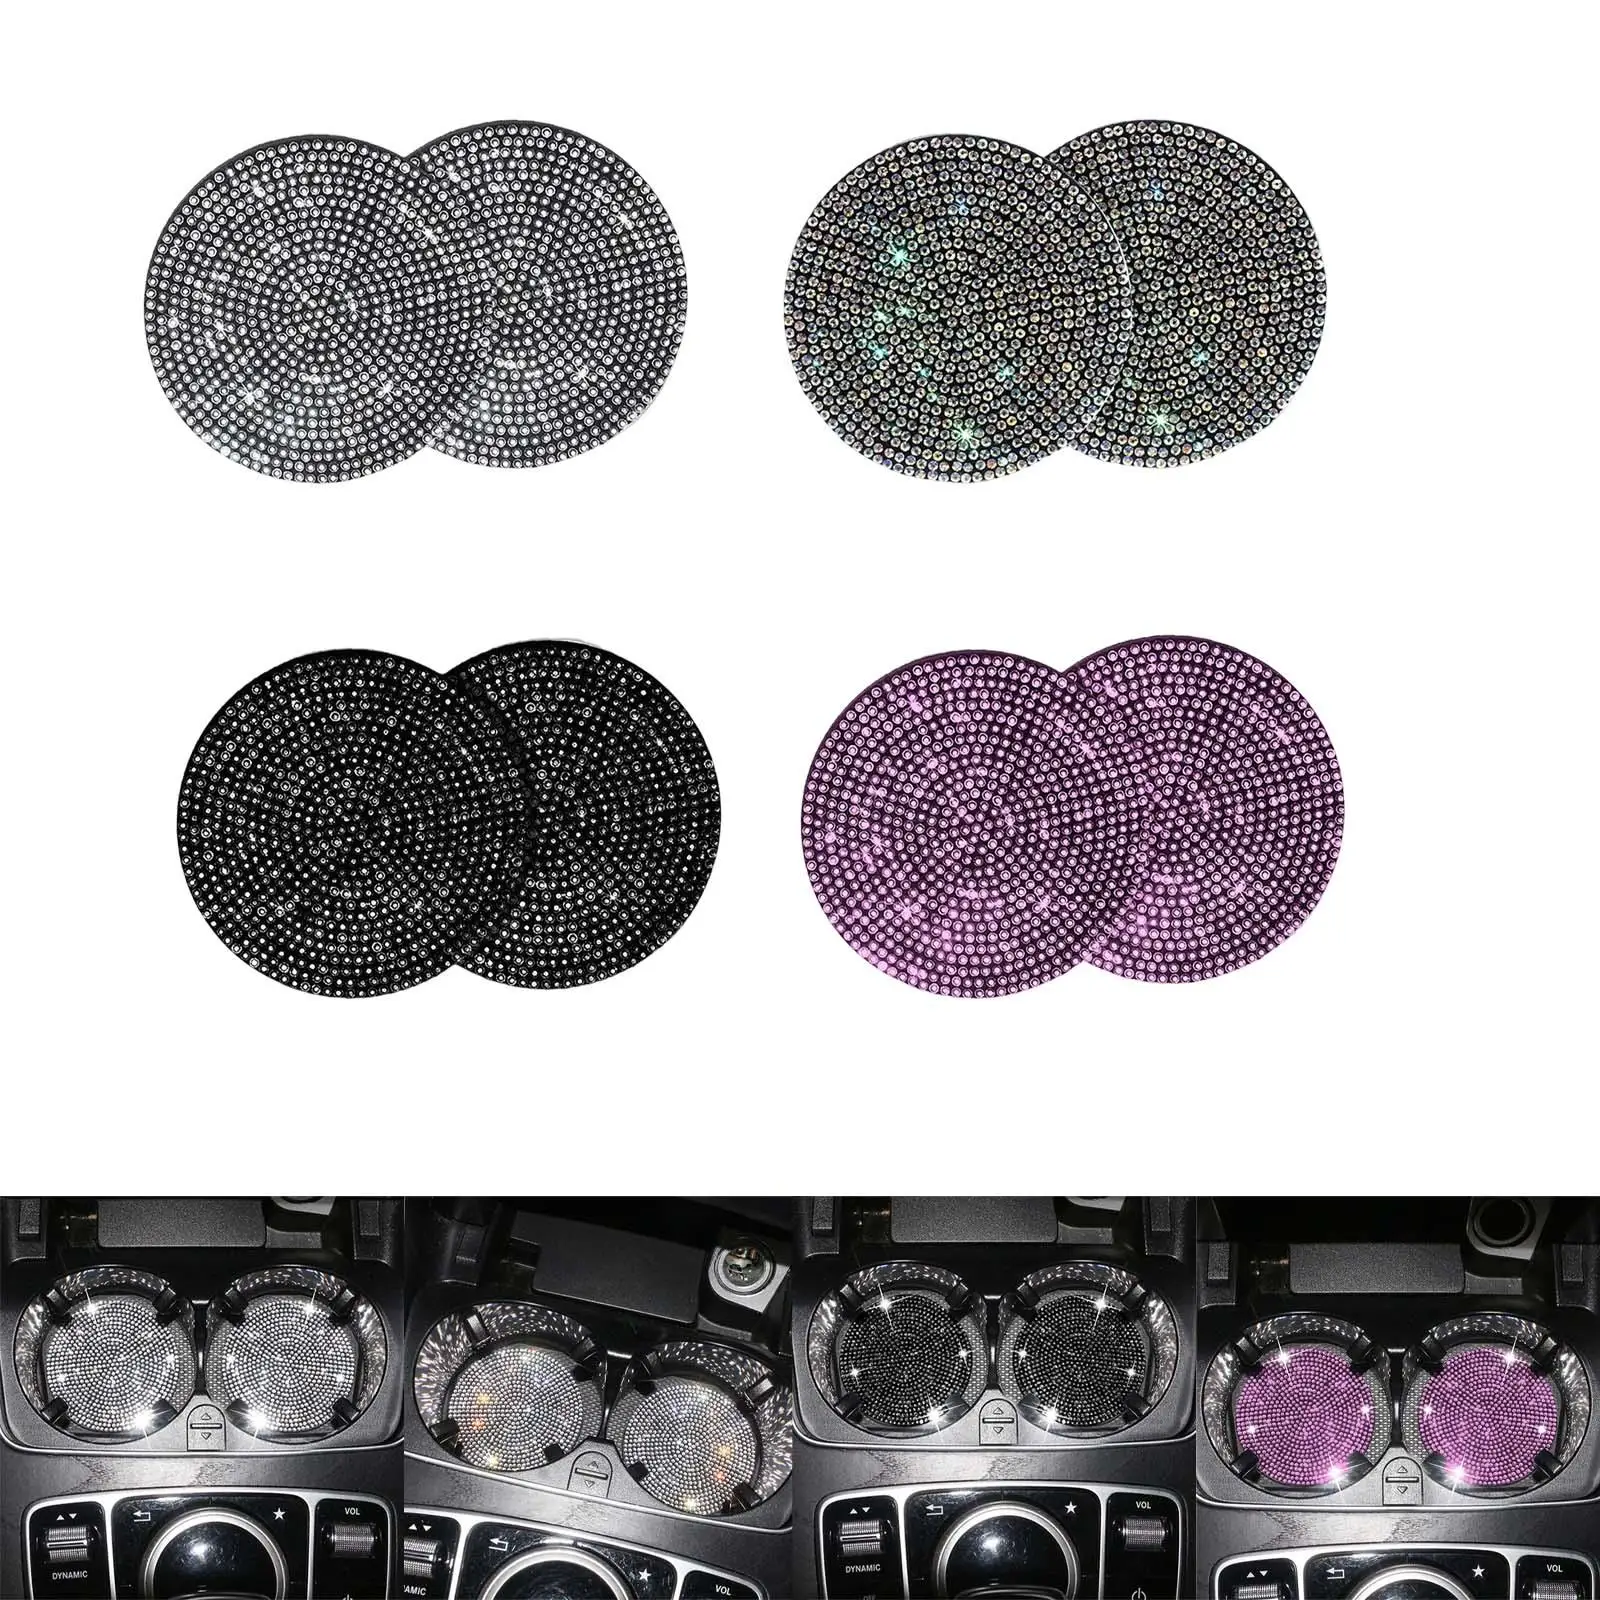 2Pcs Bling Car Cup Holder Coaster Crystal Rhinestone Water Cup Bottle Holder Coaster Automotive Luxury Auto 7 cm Mat Pad Gift